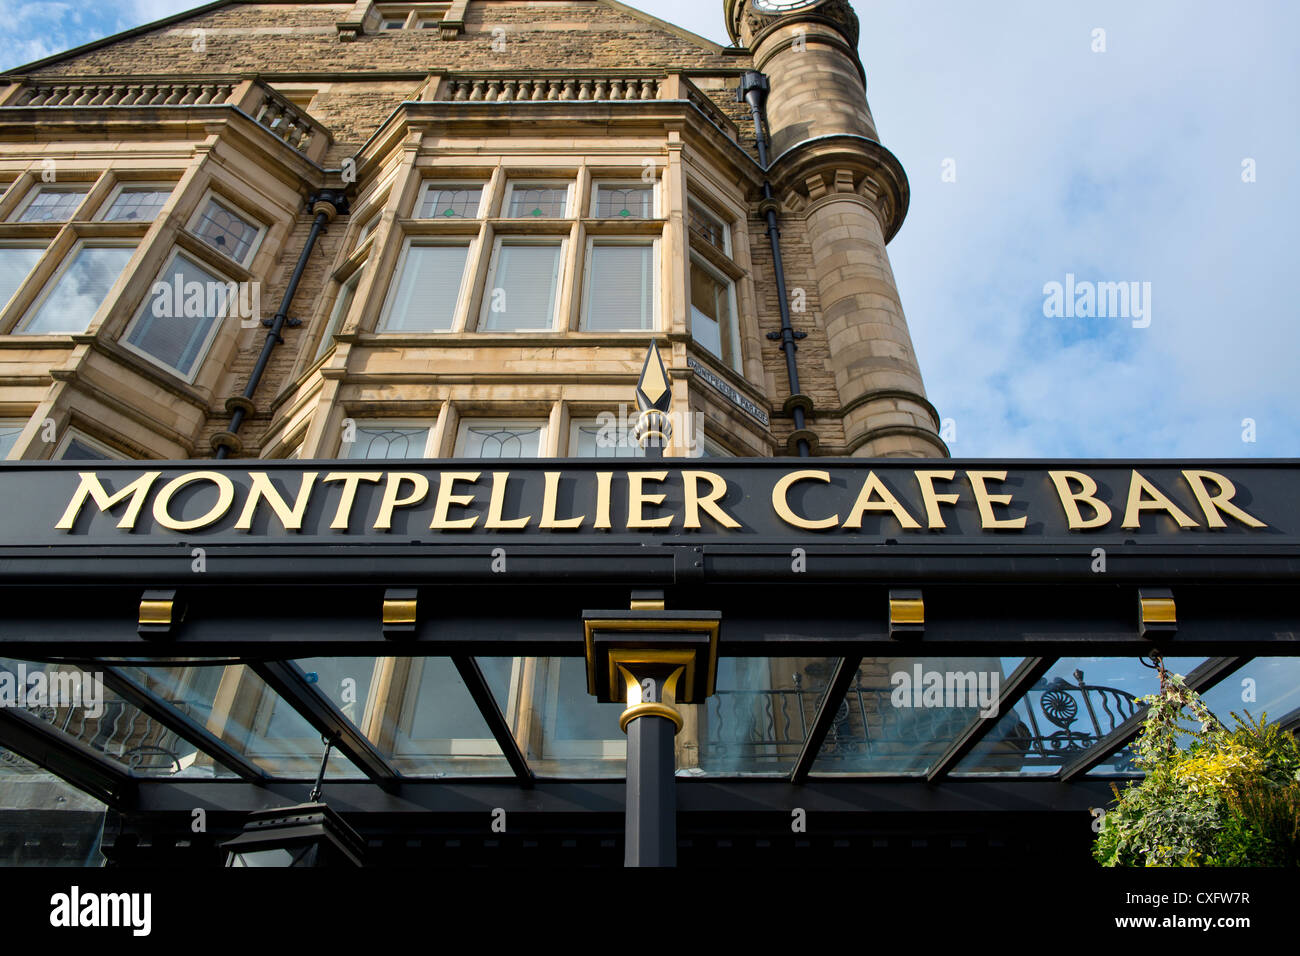 Montpellier Cafe Bar segnaletica, parte di Betty's Tea Rooms in Harroagte, West Yorkshire. Foto Stock